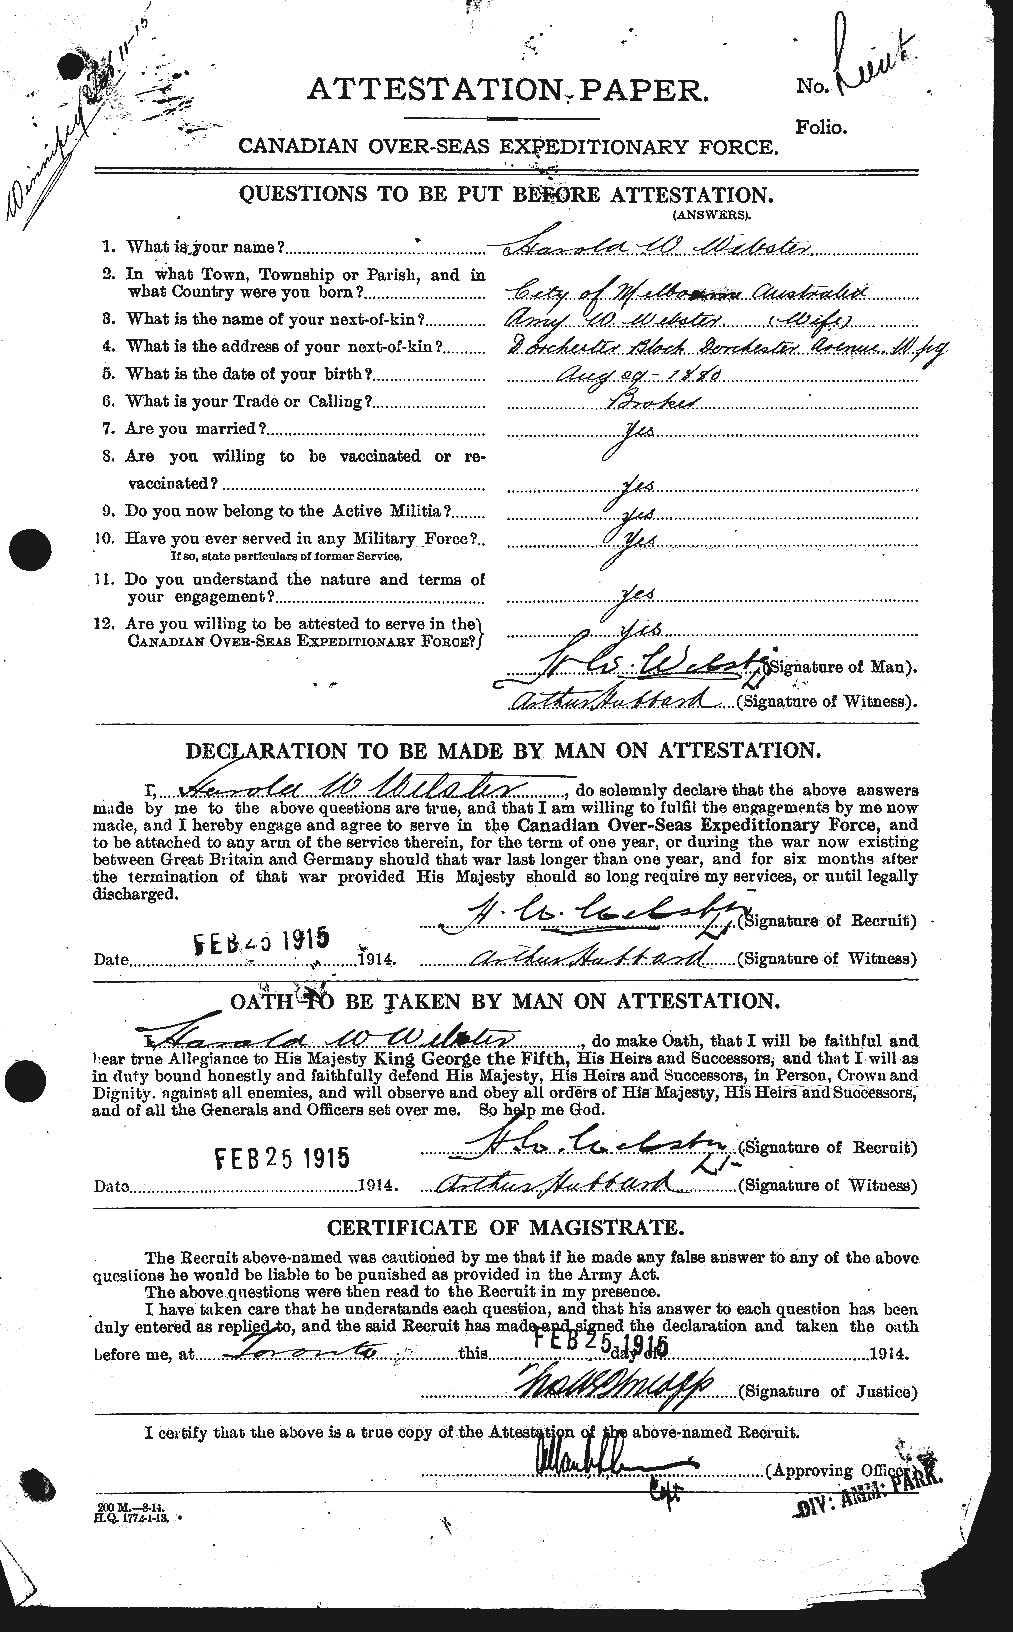 Personnel Records of the First World War - CEF 670406a